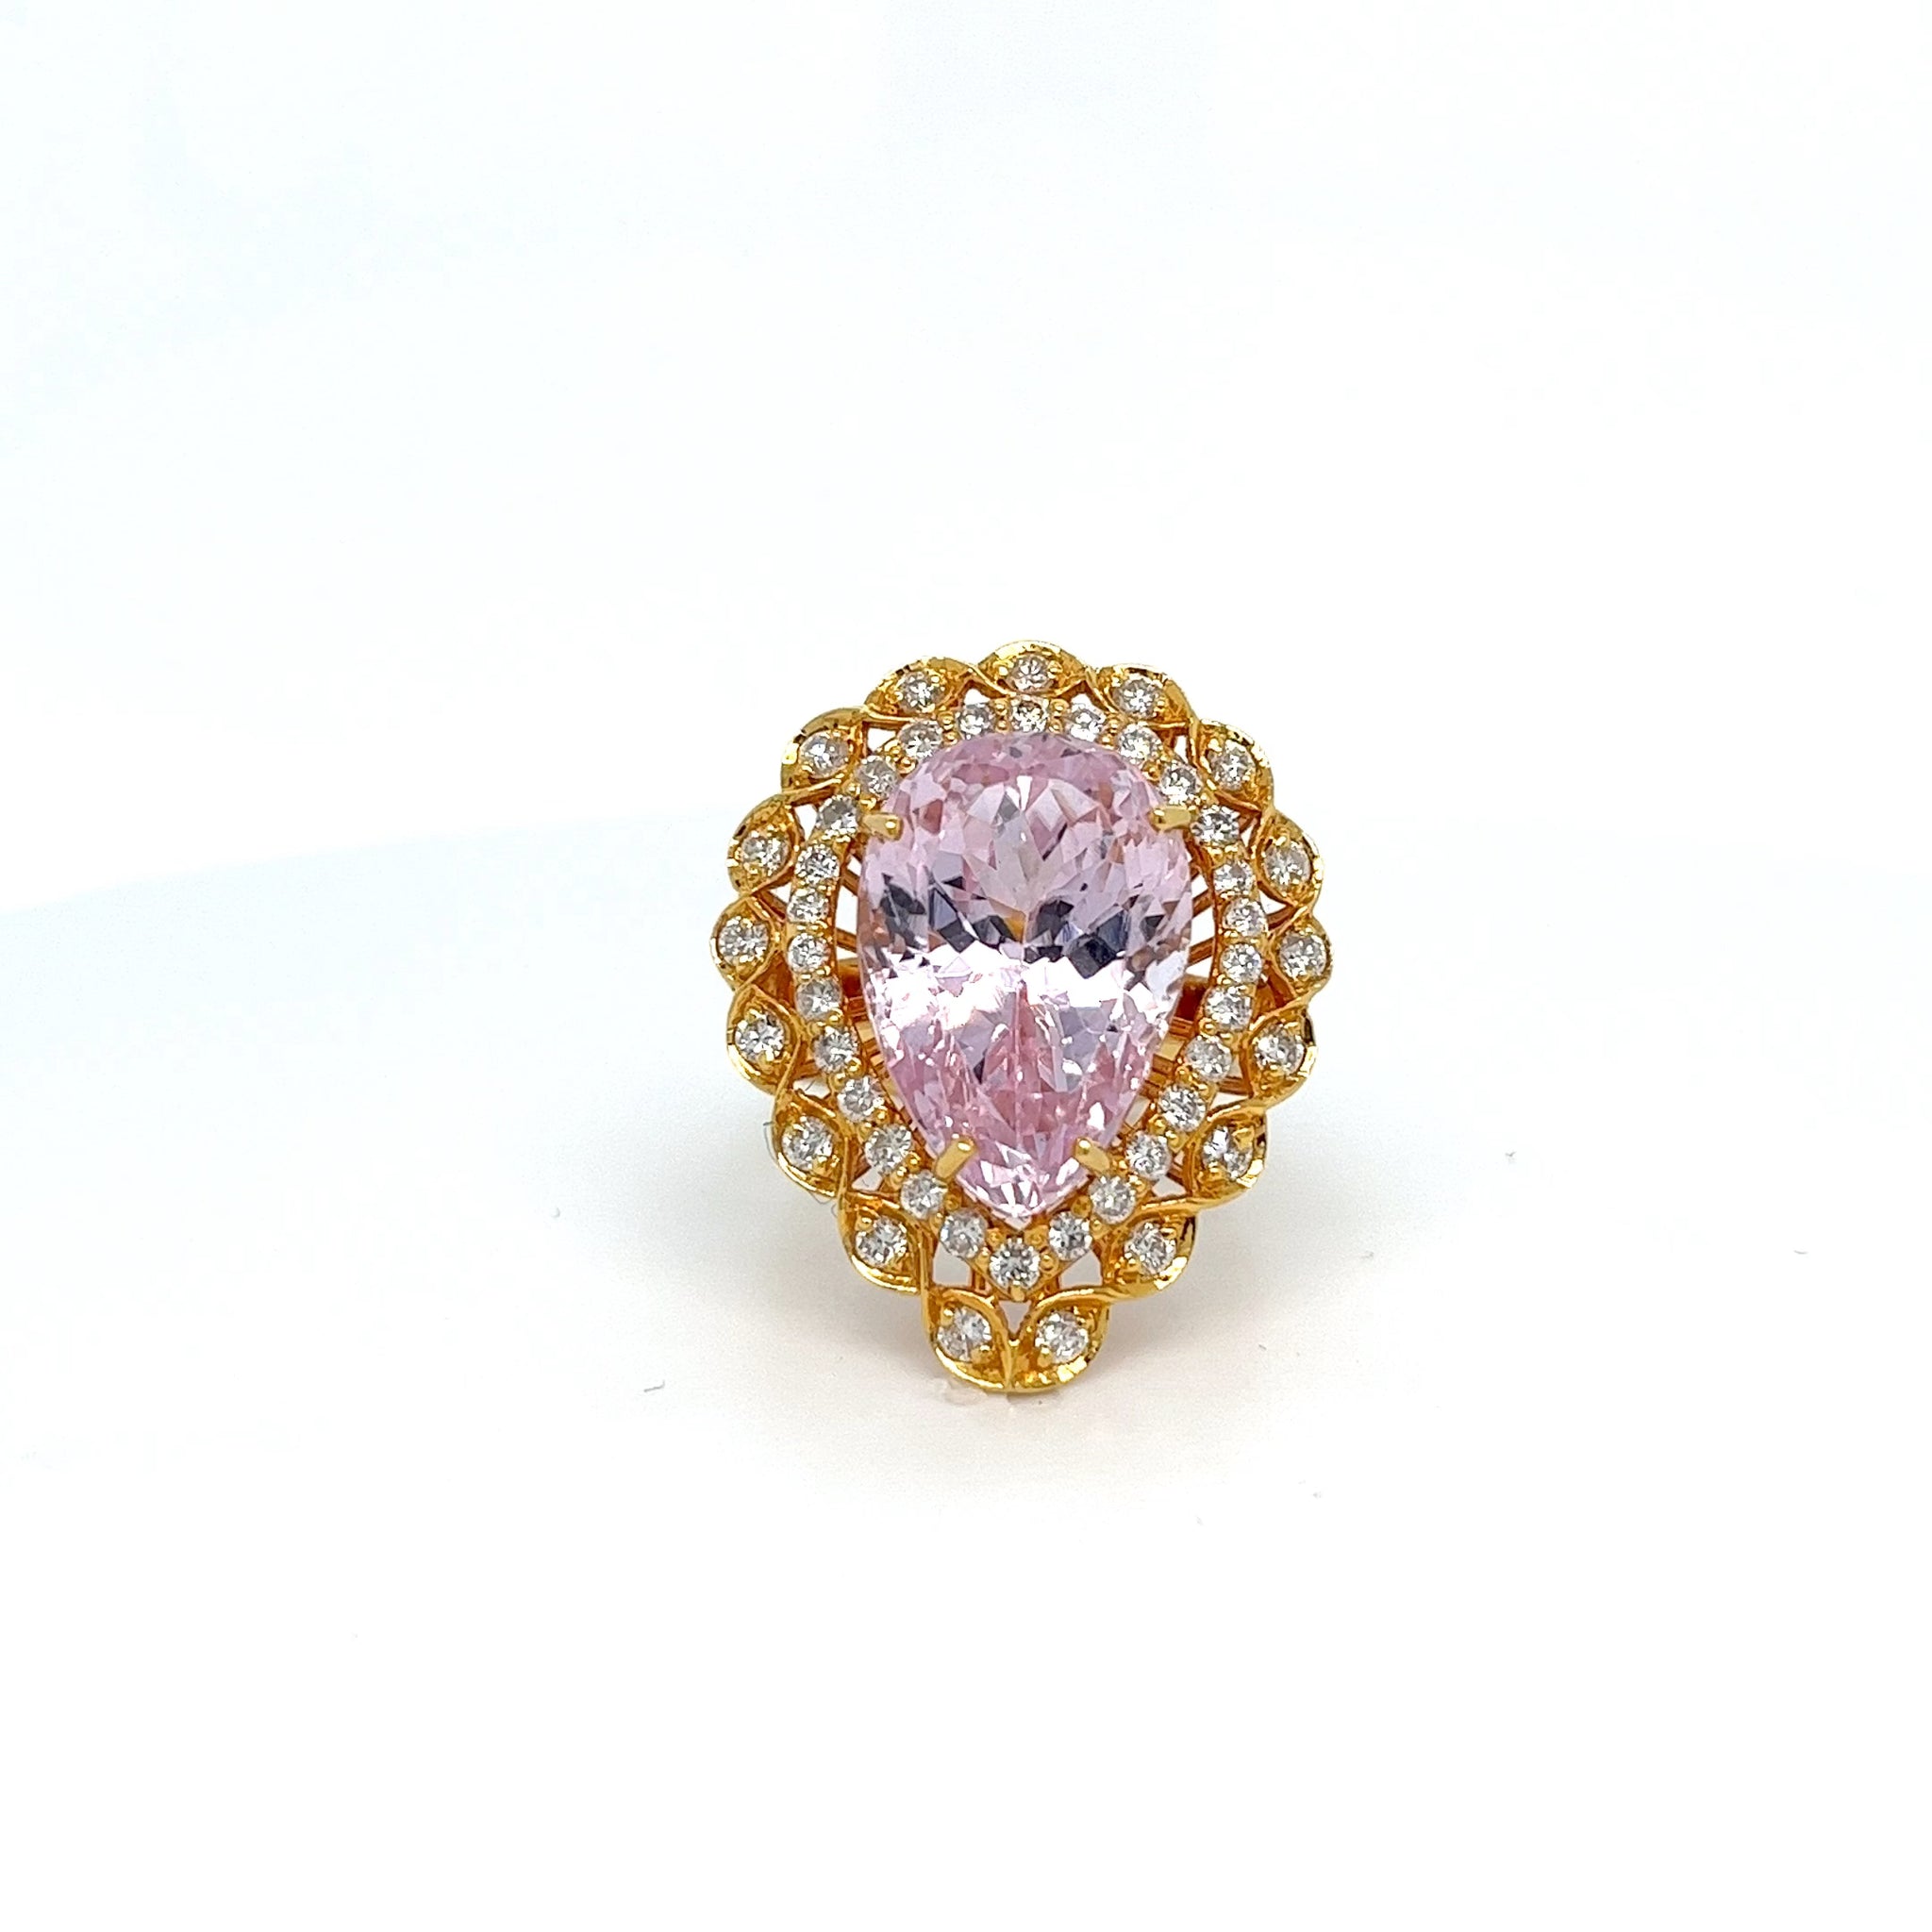 One-of-a-Kind 18kt Gold Center Pear Shape Kunzite Cocktail Ring